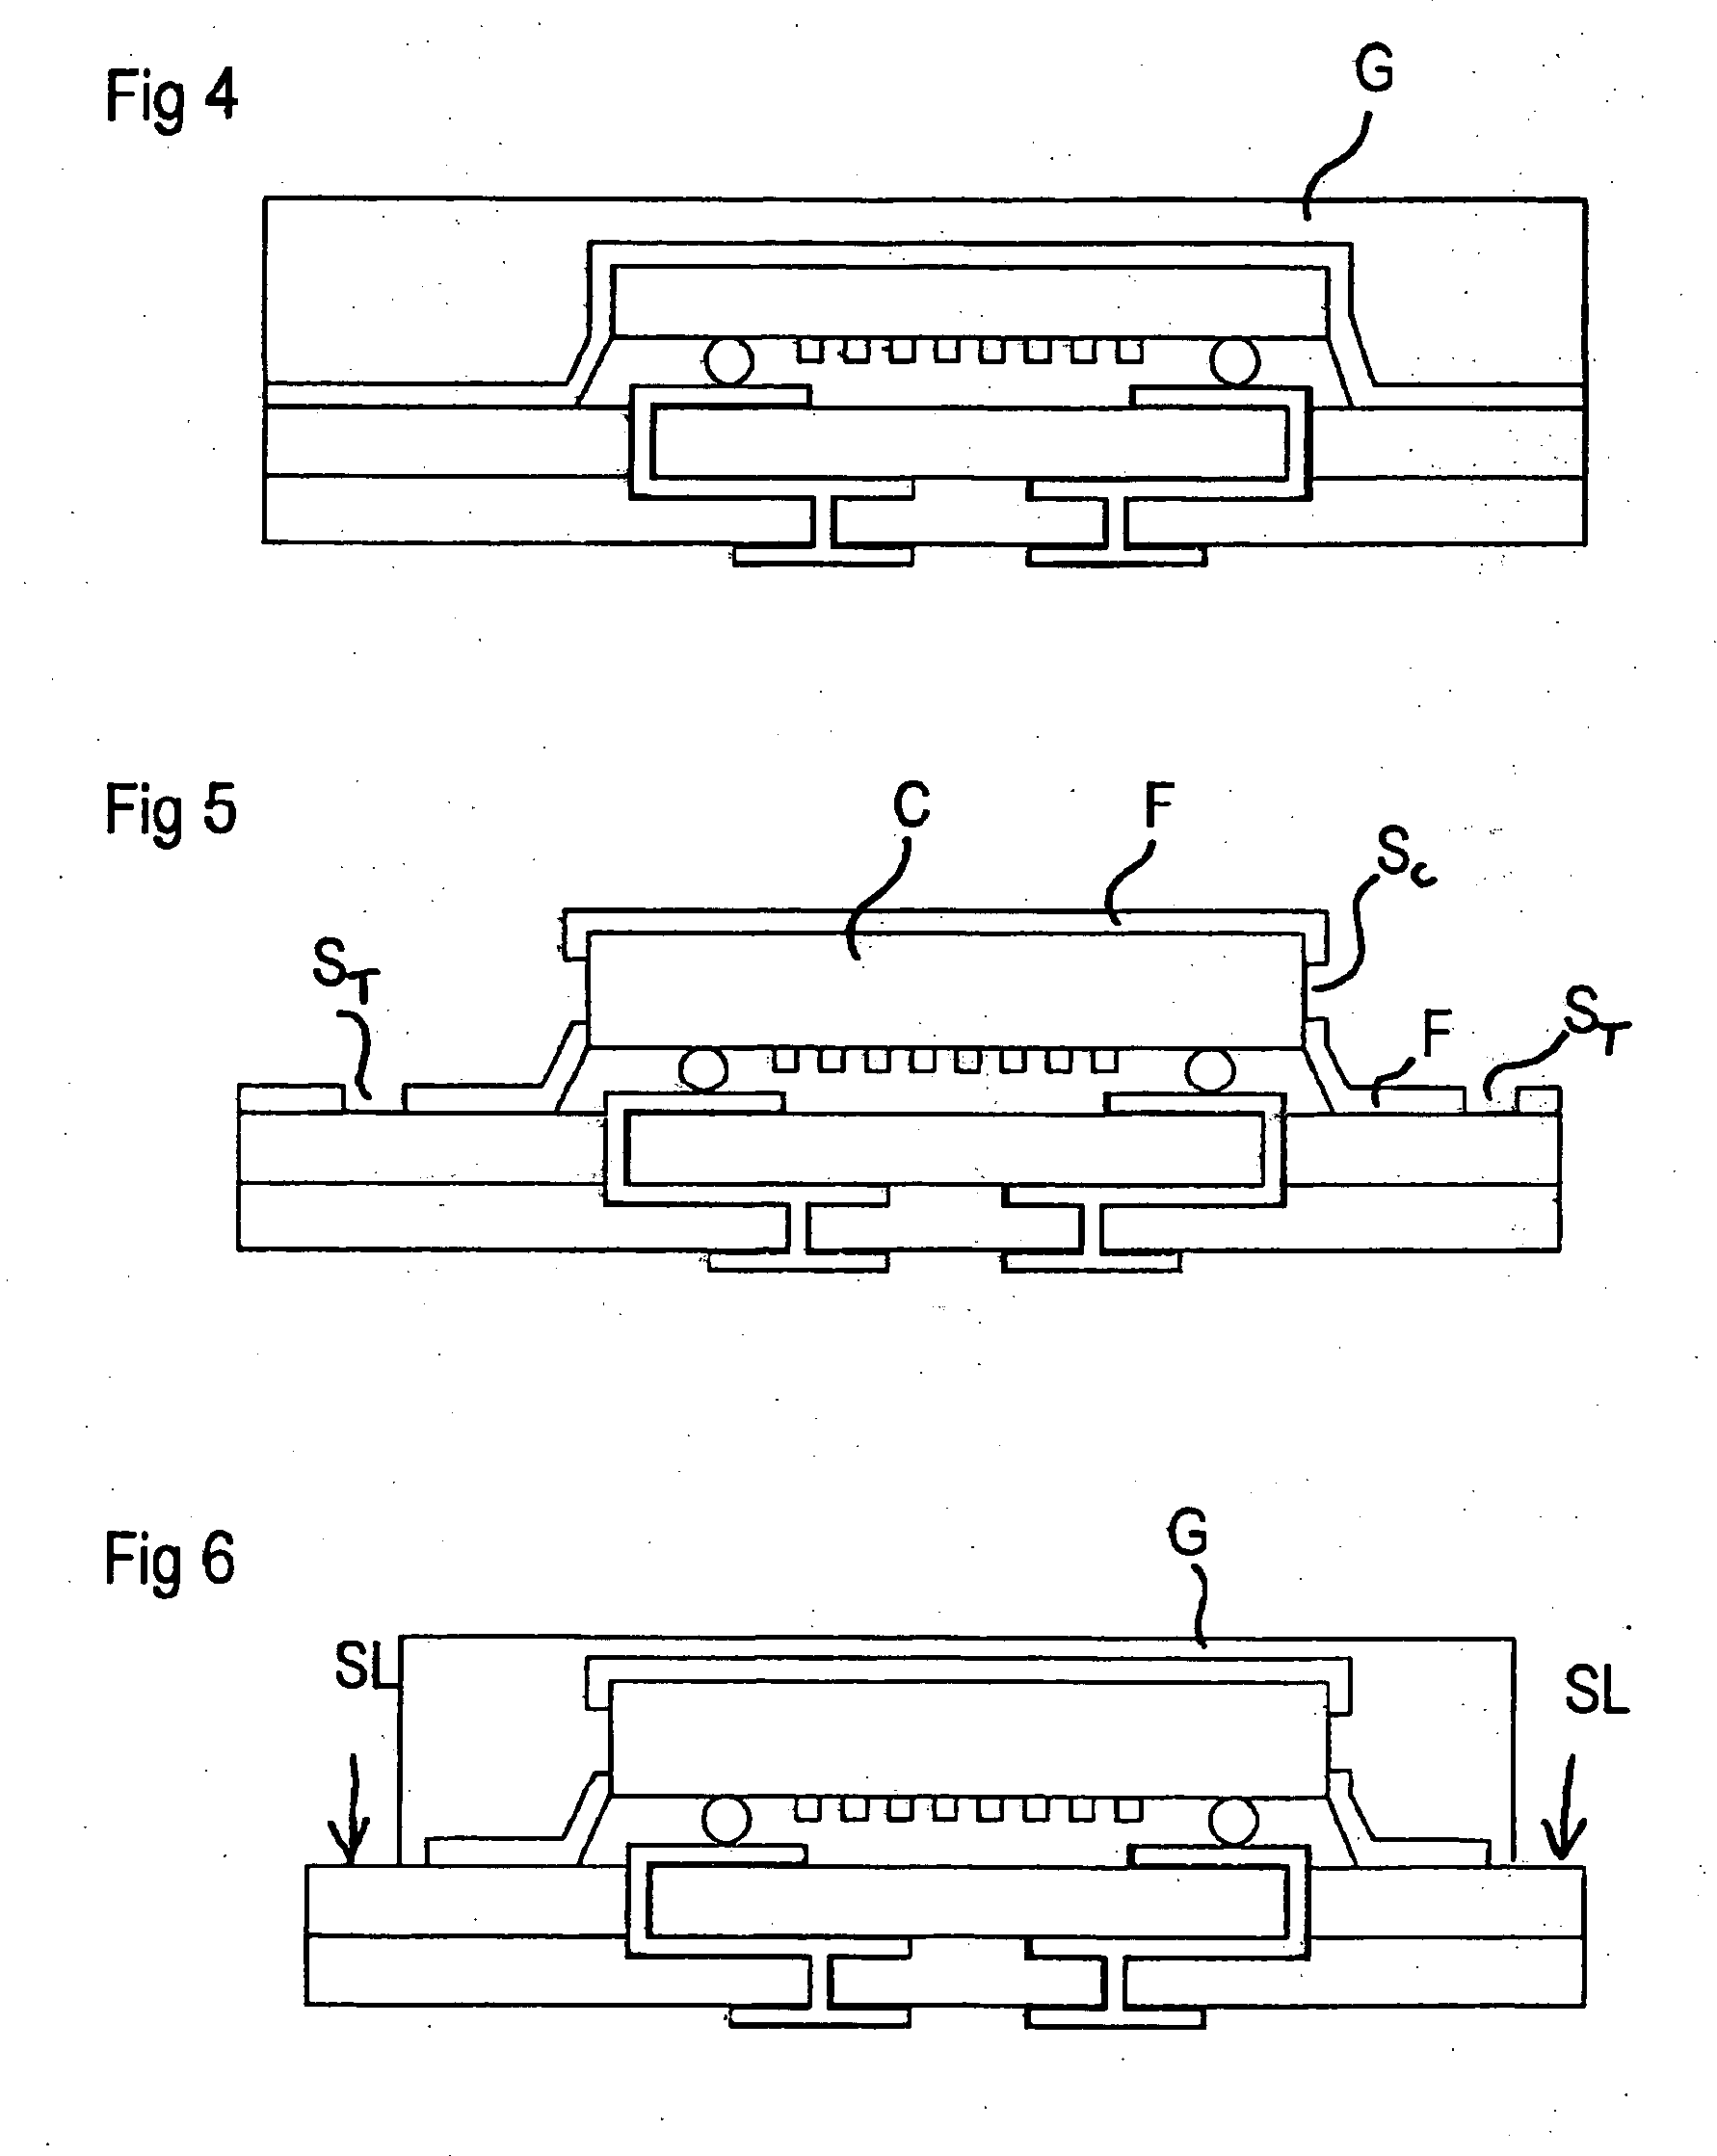 Method for encapsulating an electrical component, and surface acoustic wave device encapsulated using said method